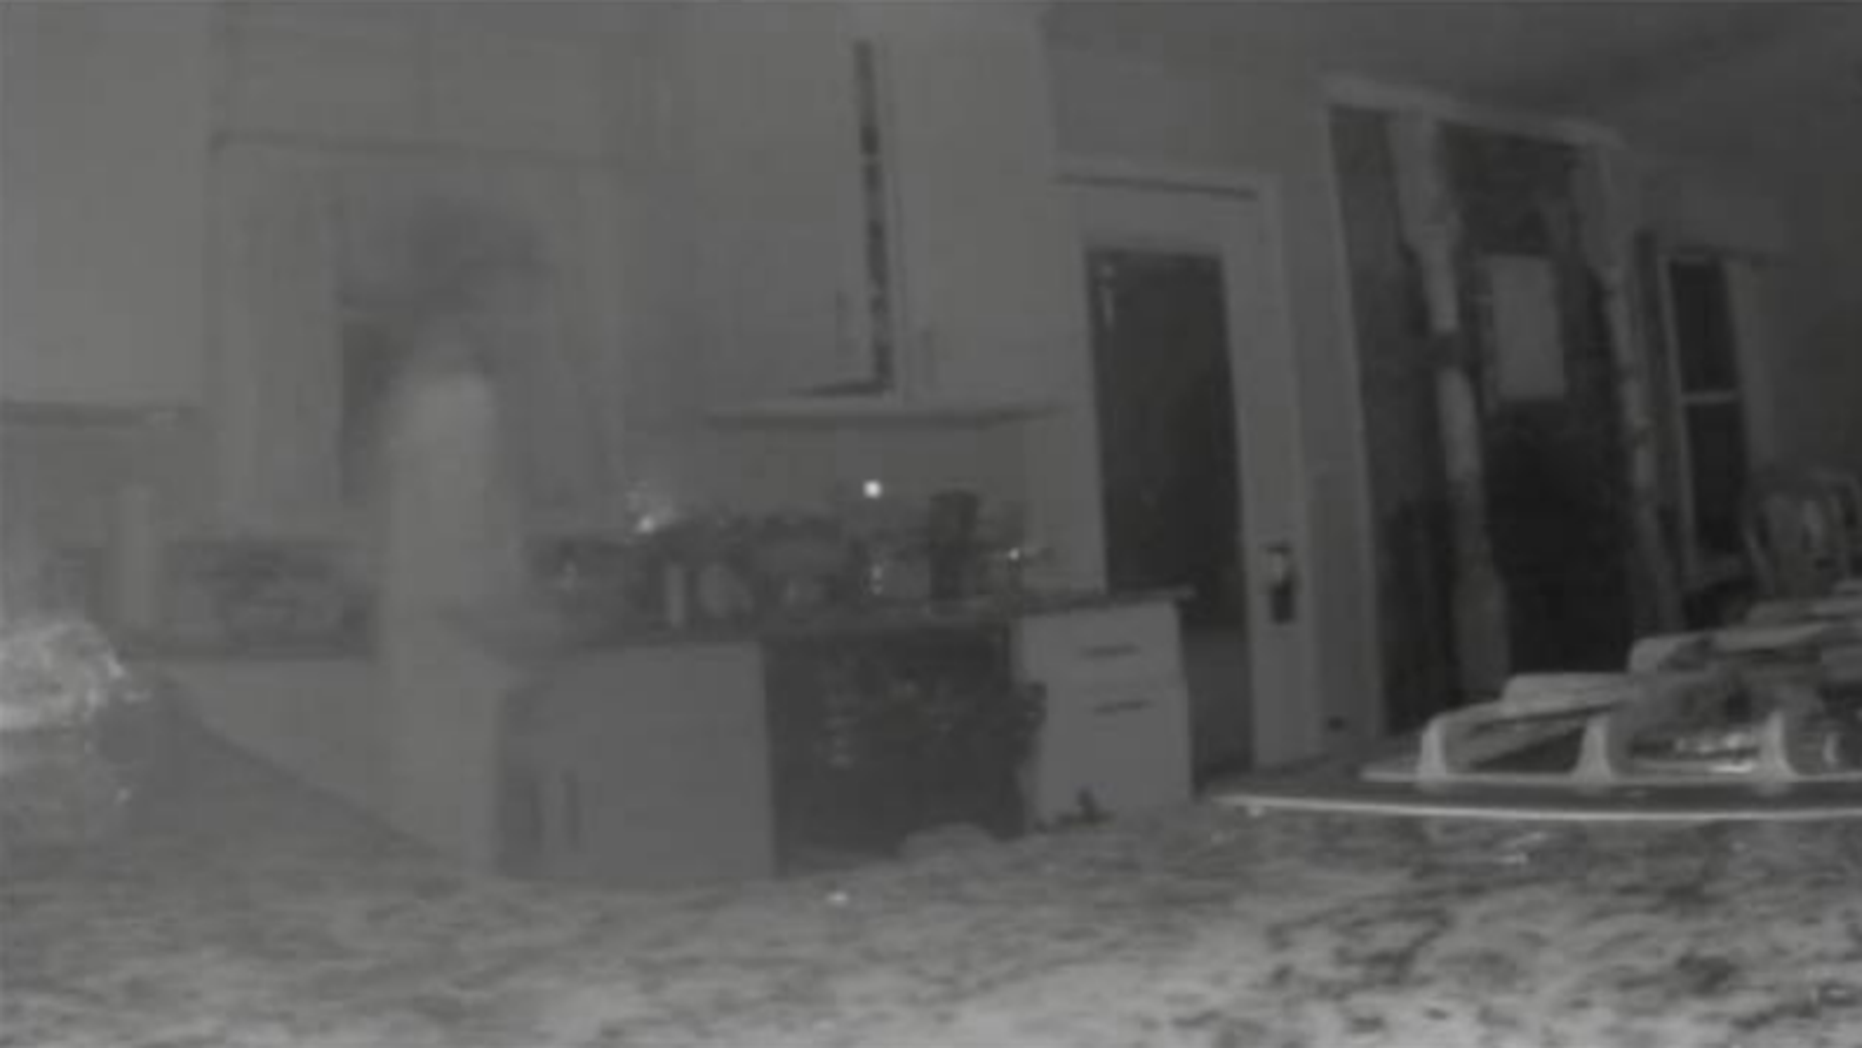 Security camera captured image of deceased son